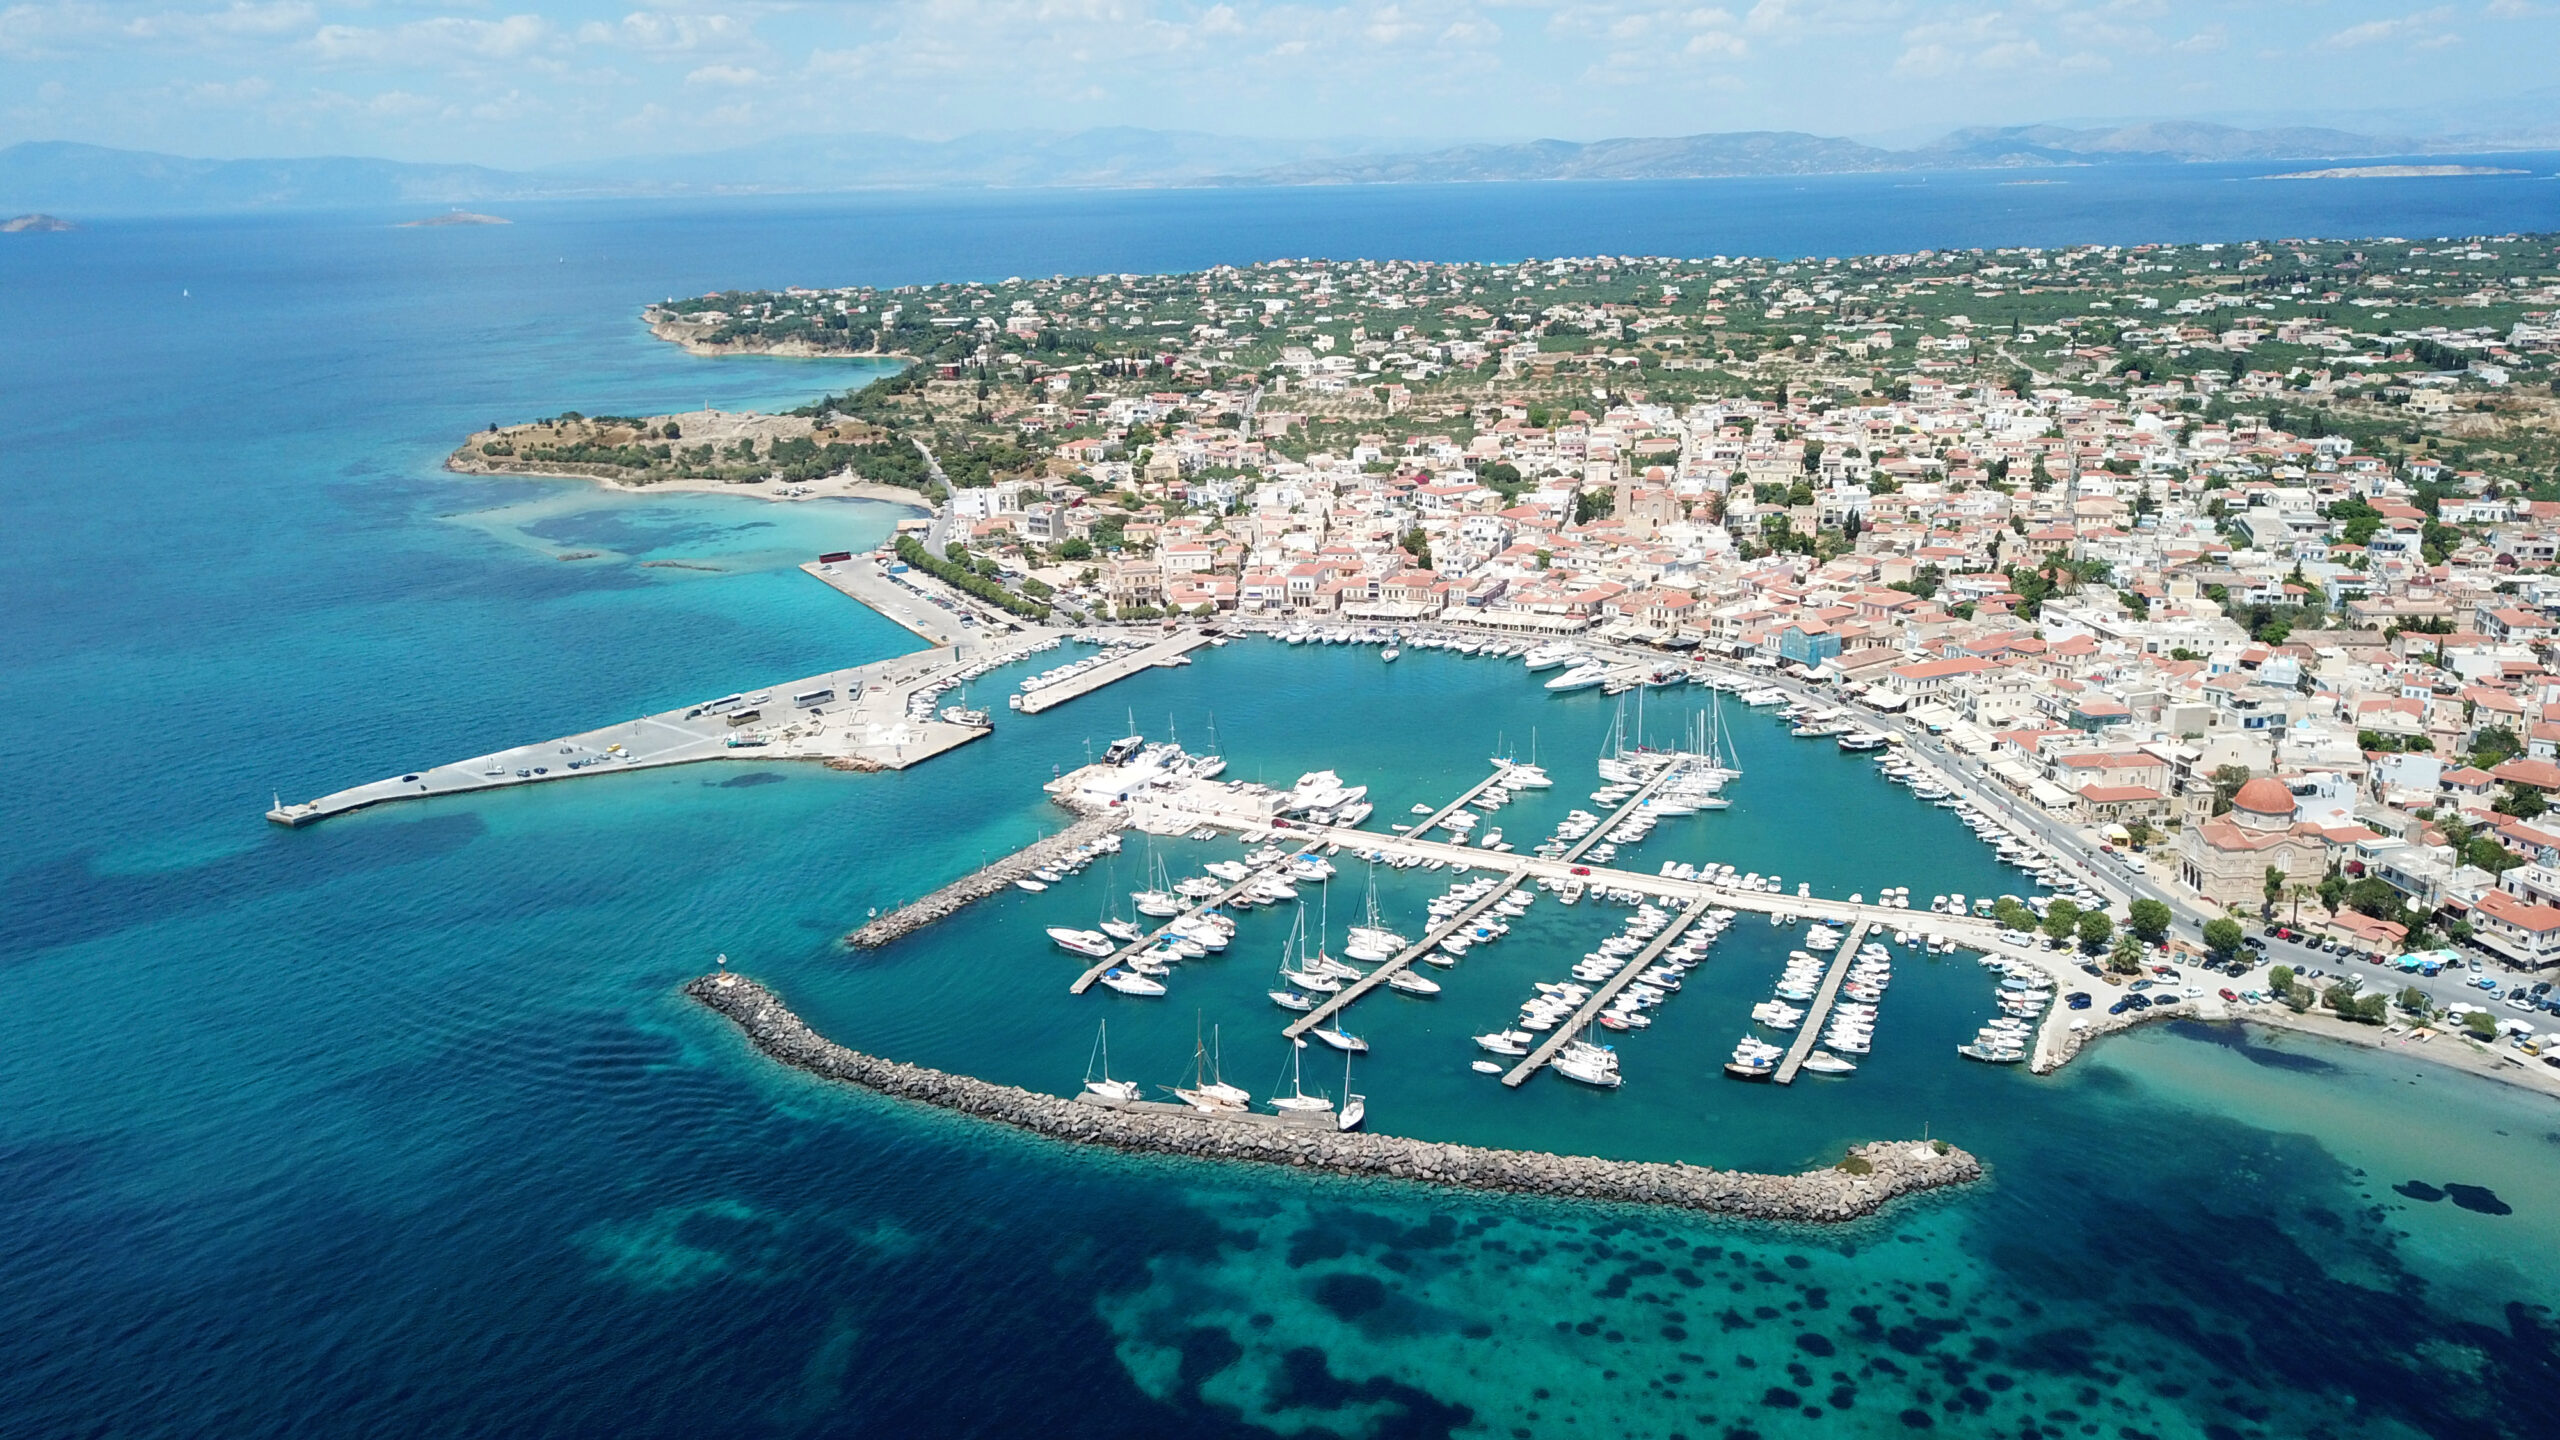 Aerial view photo of the picturesque port of Aegina island, Saronic Gulf, Greece